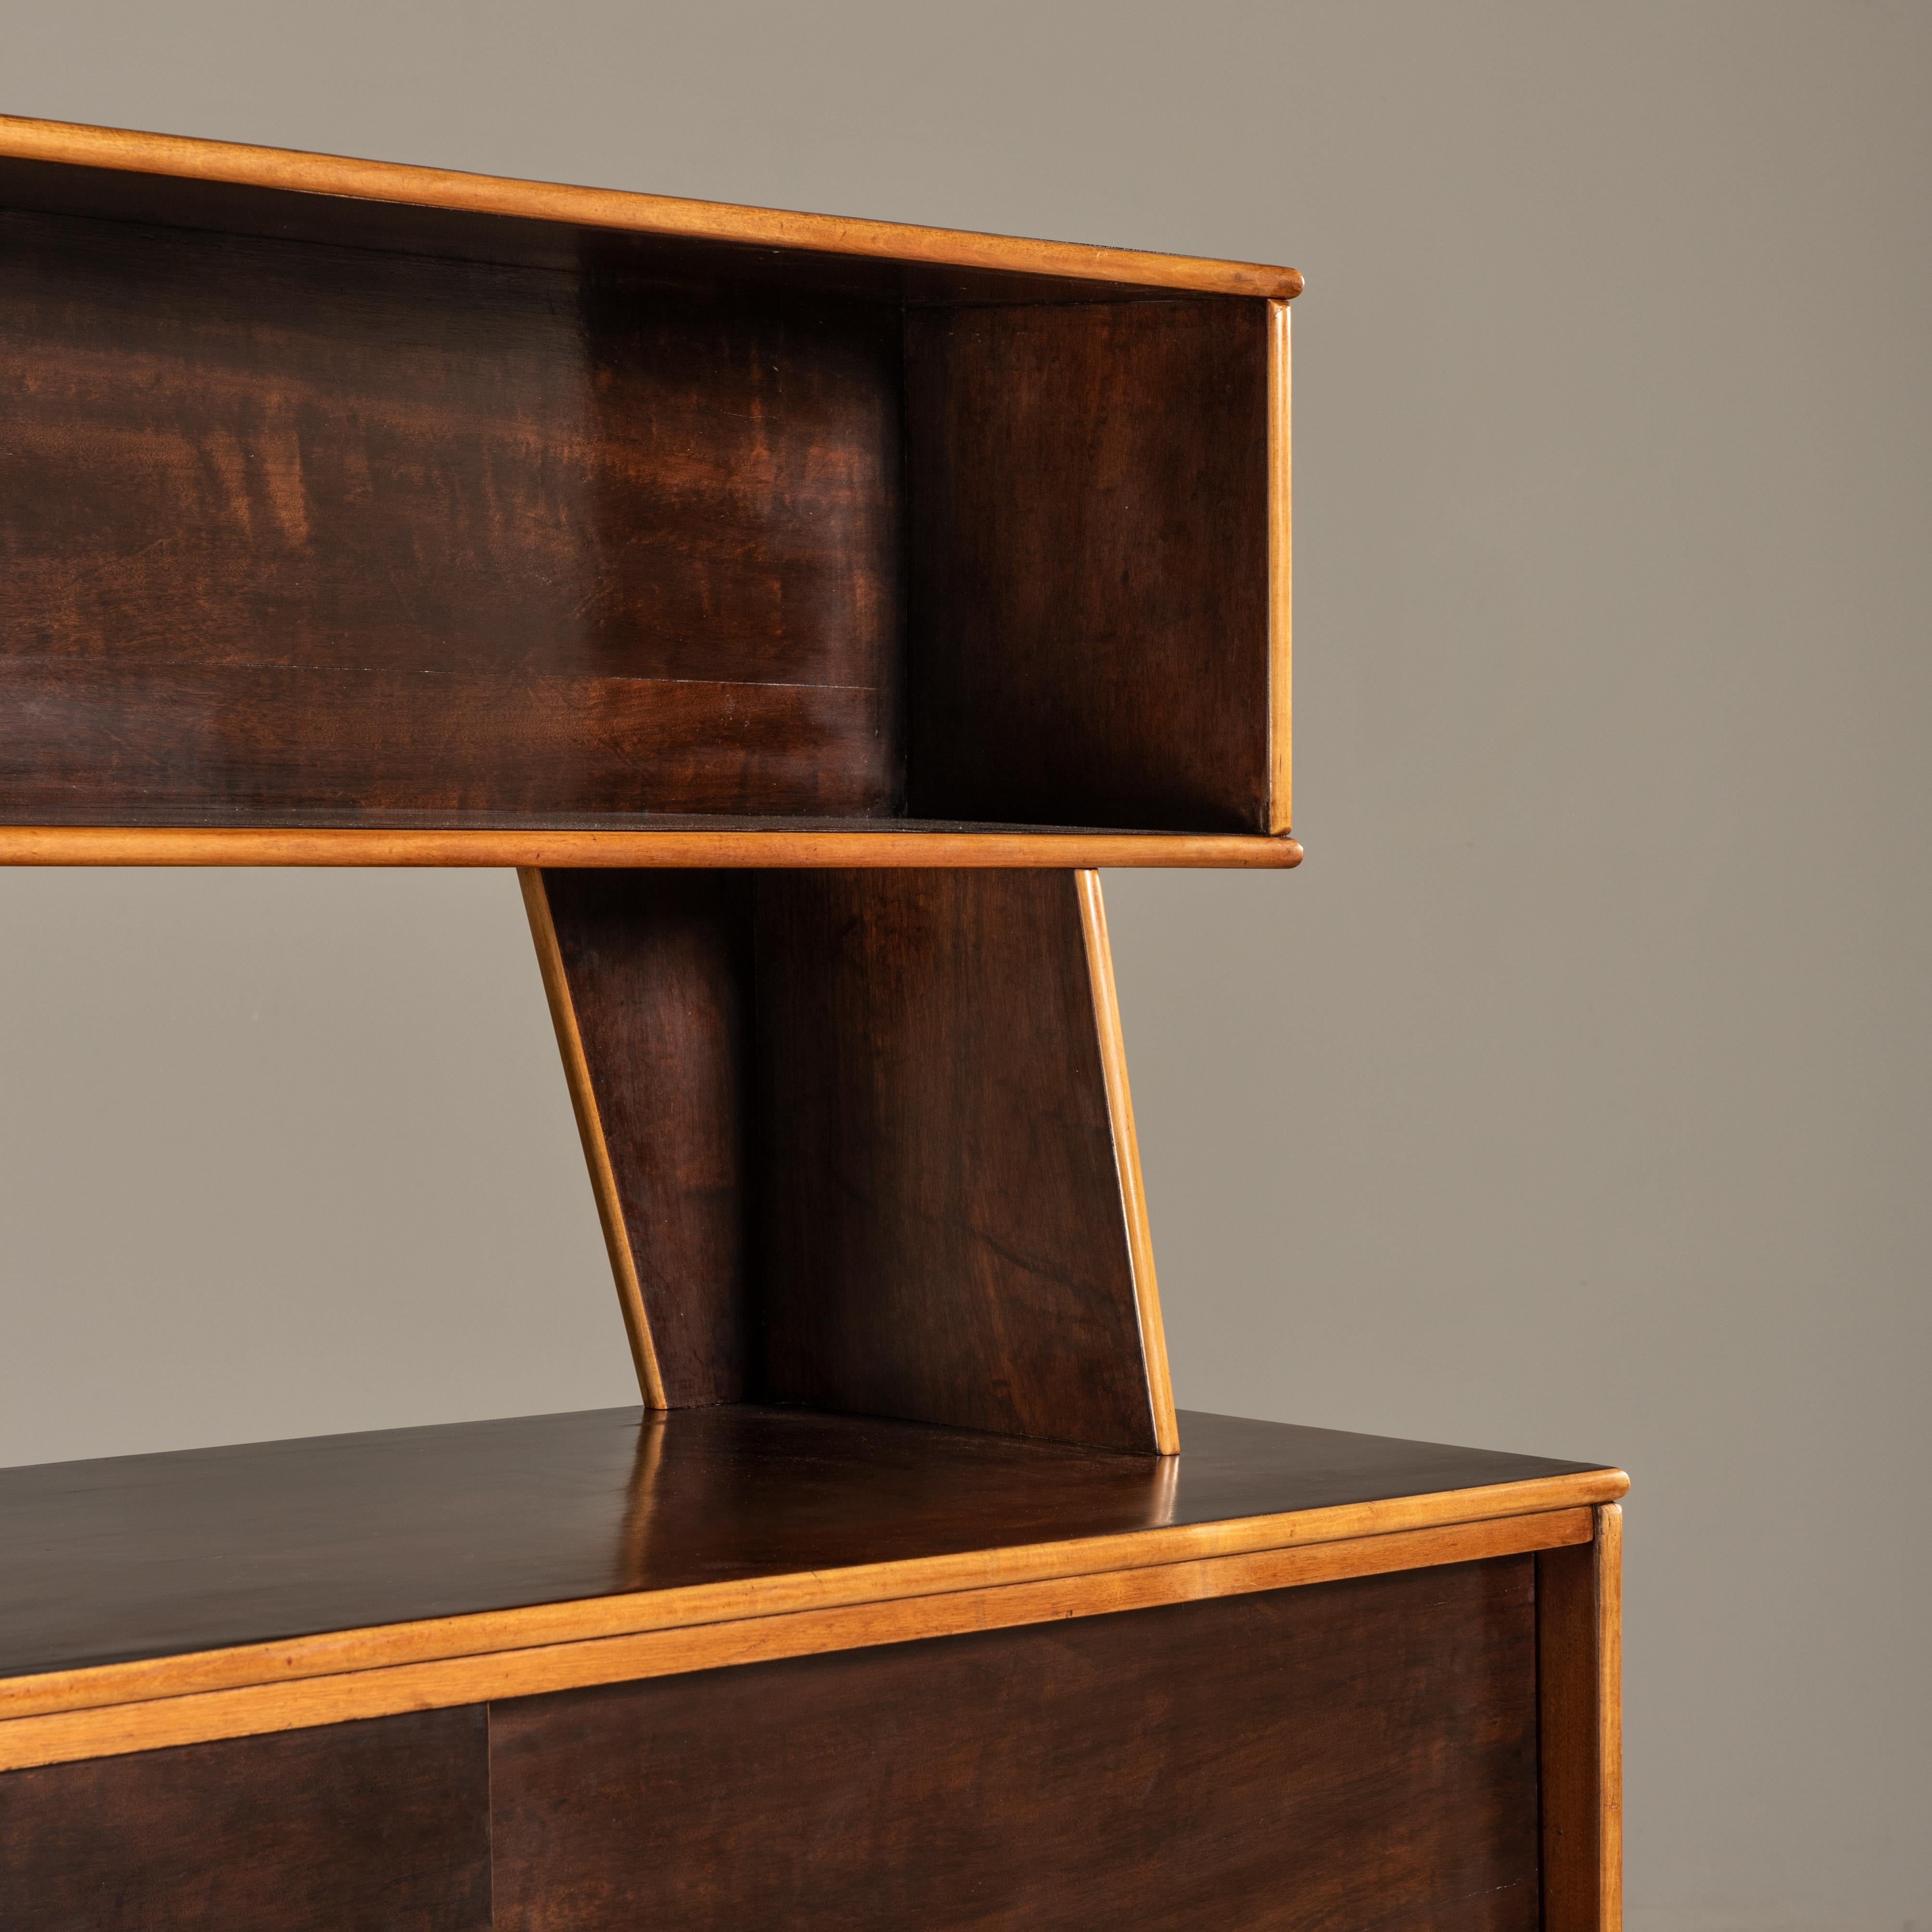 20th Century Large Sideboard in Wood and Iron, by Martin Eisler, Mid-Century Brazilian Design